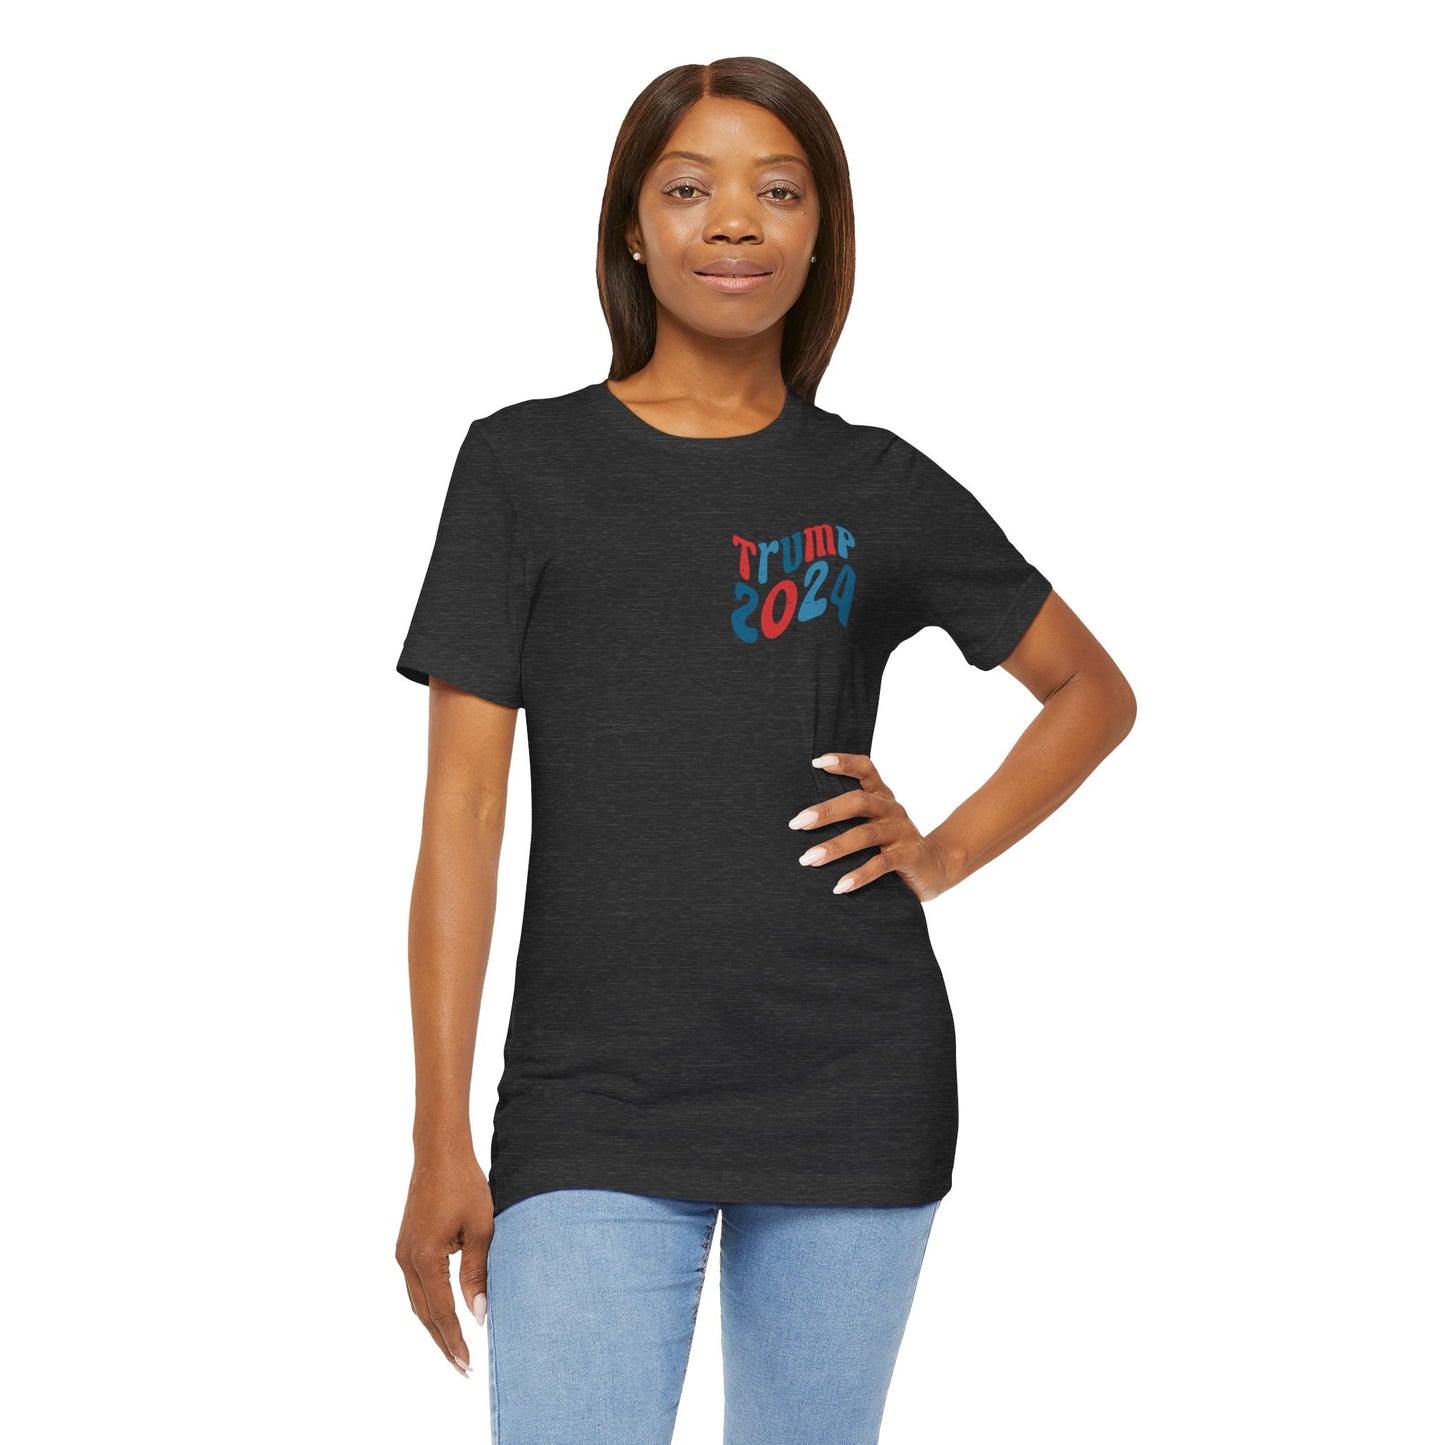 Trump President Election Front and Back Women's Adult Short Sleeve Tee